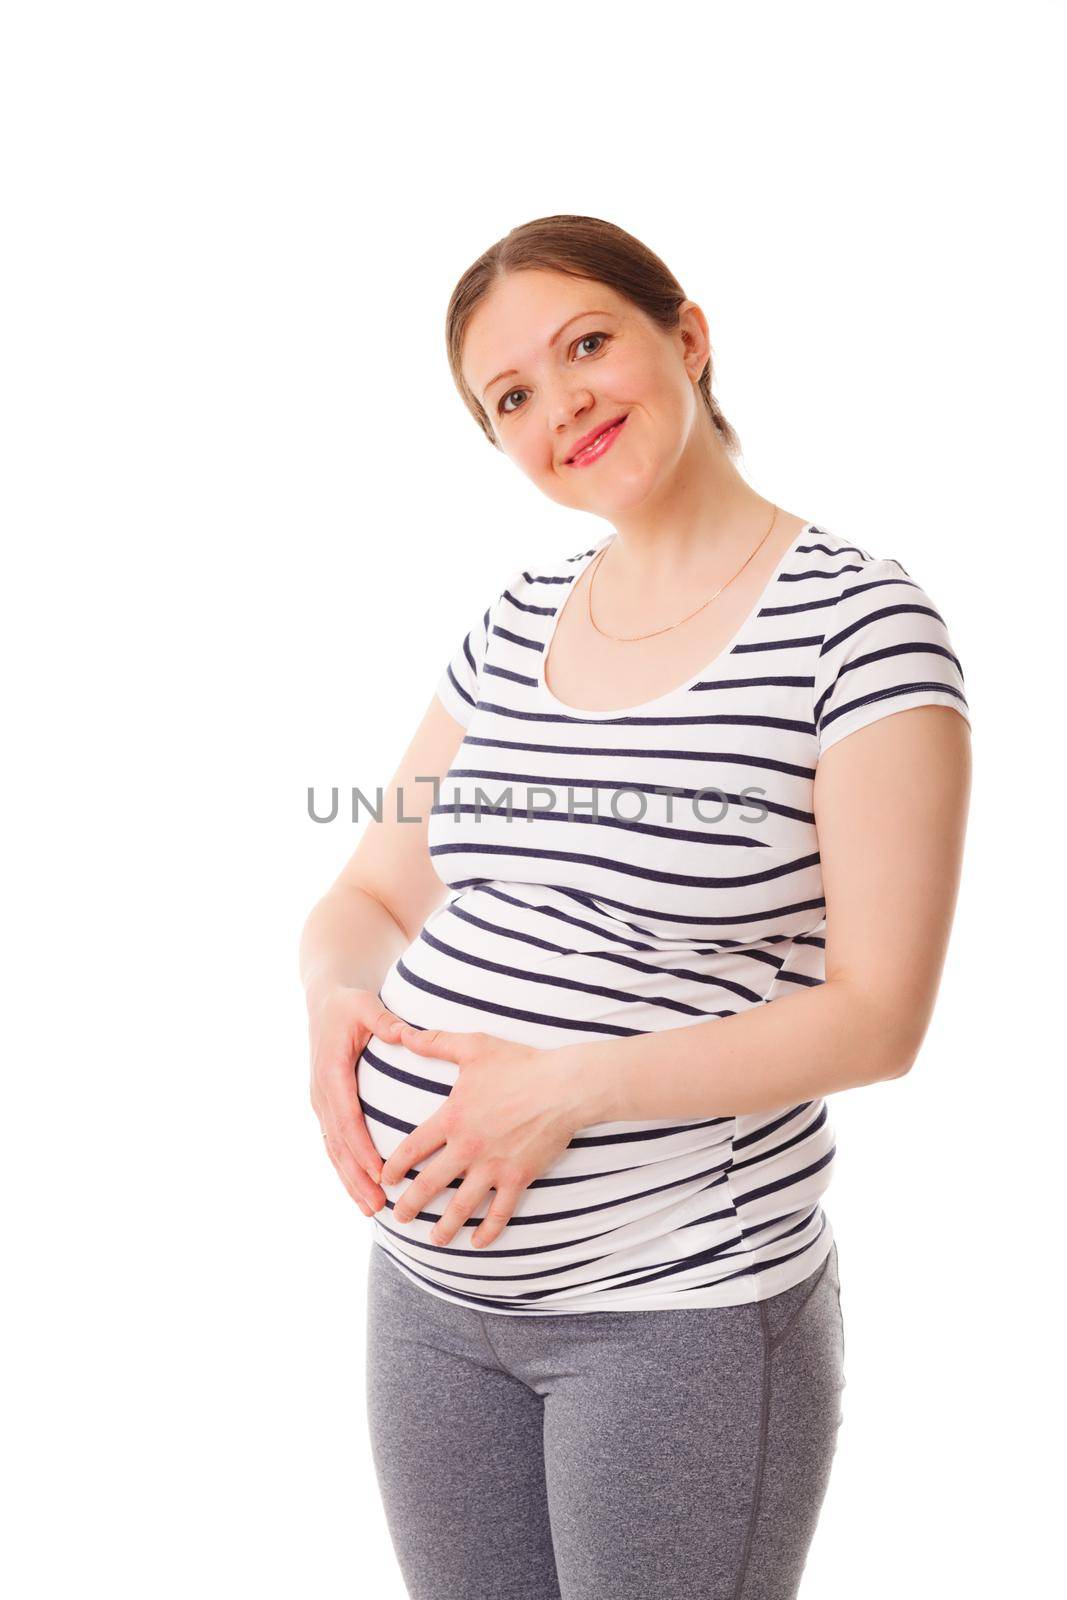 Pregnant smiling woman standing embracing her belly isolated on white background